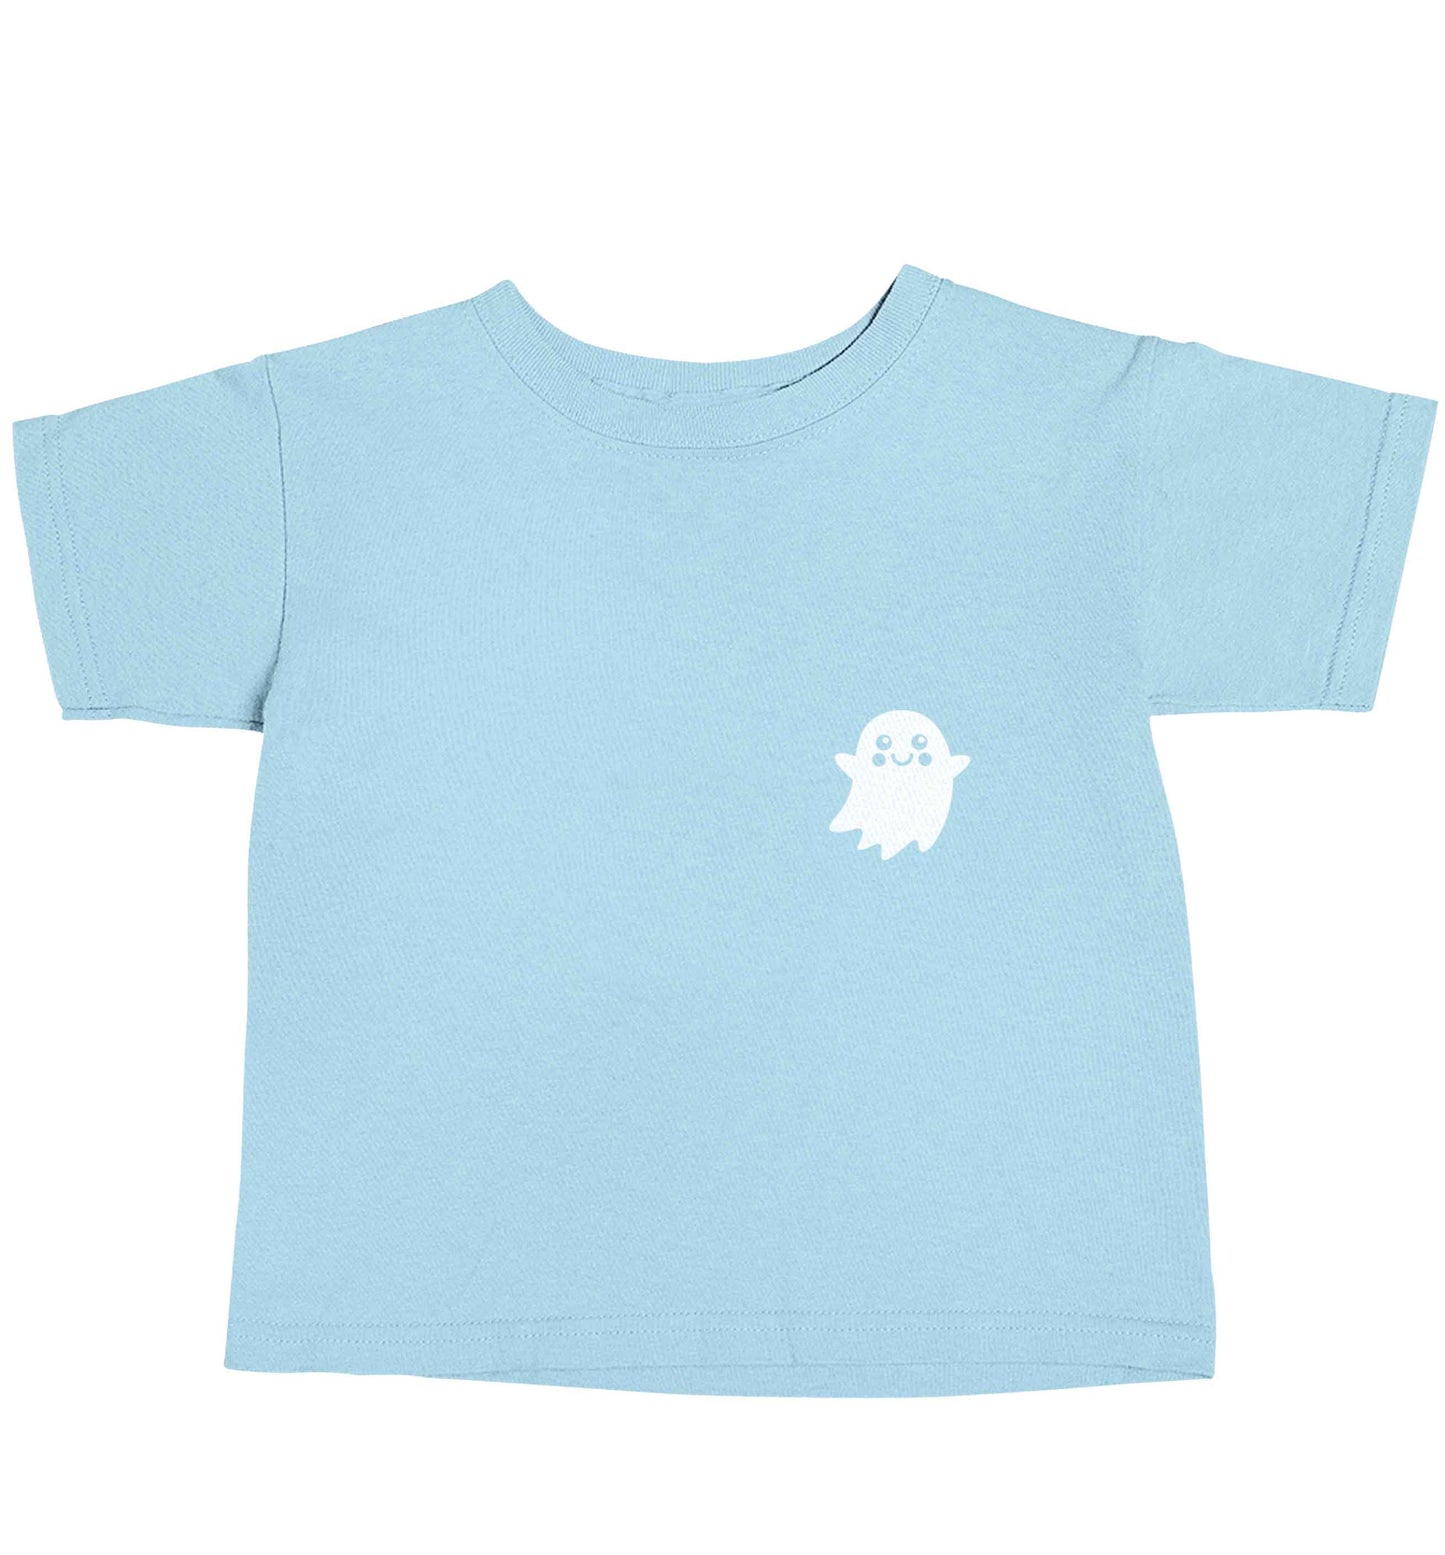 Pocket ghost light blue baby toddler Tshirt 2 Years